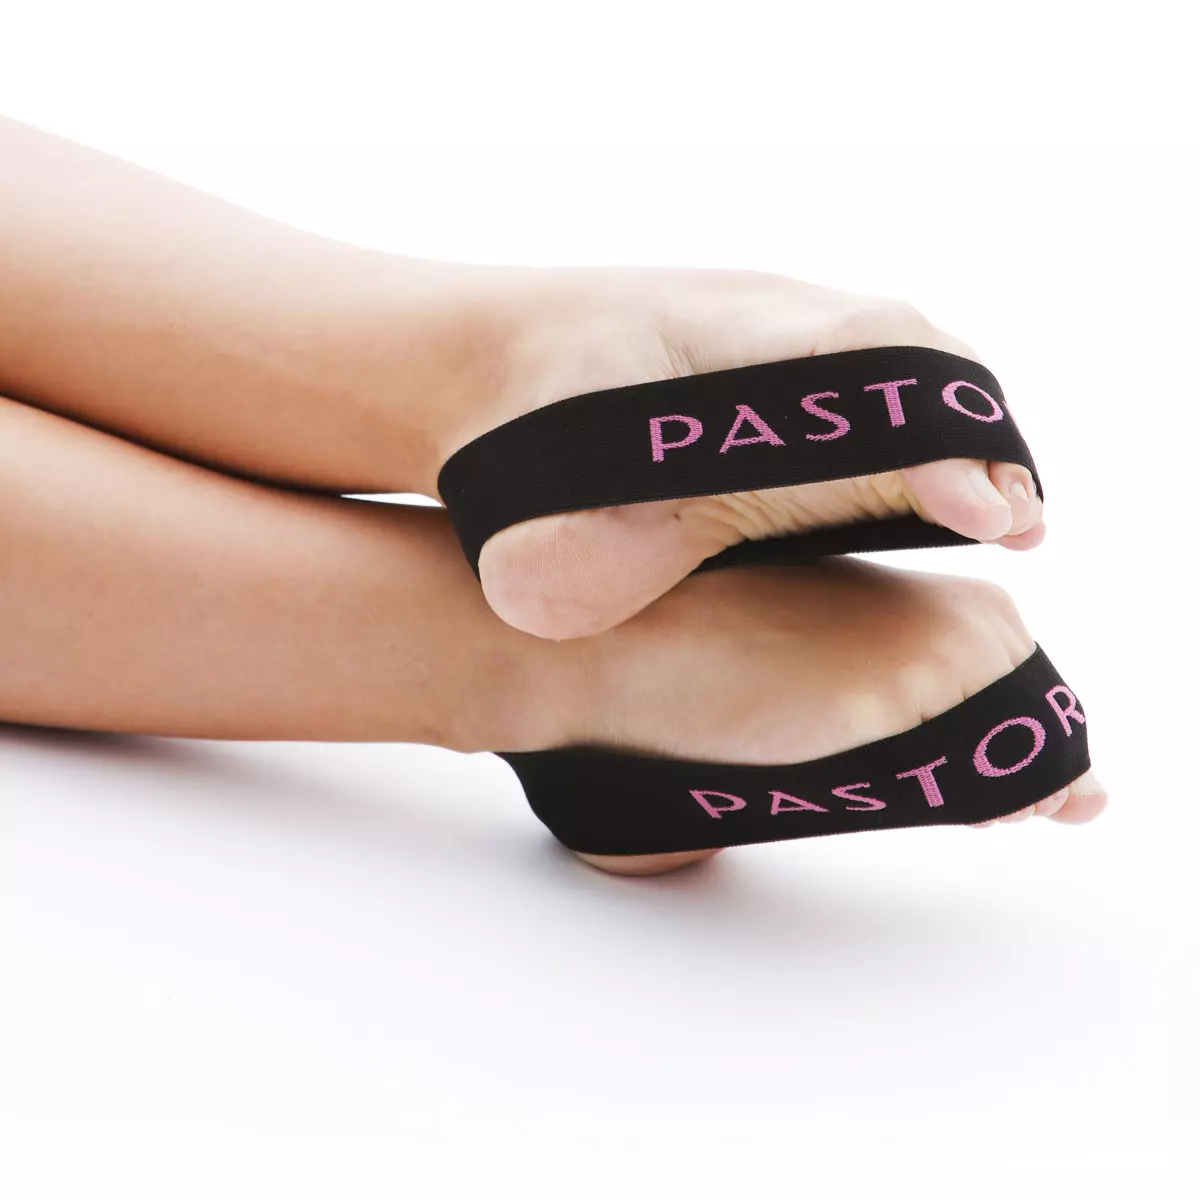 <p><strong><span style="color: rgb(0, 0, 0)">Pastorelli-Foot resistance bands</span></strong></p>